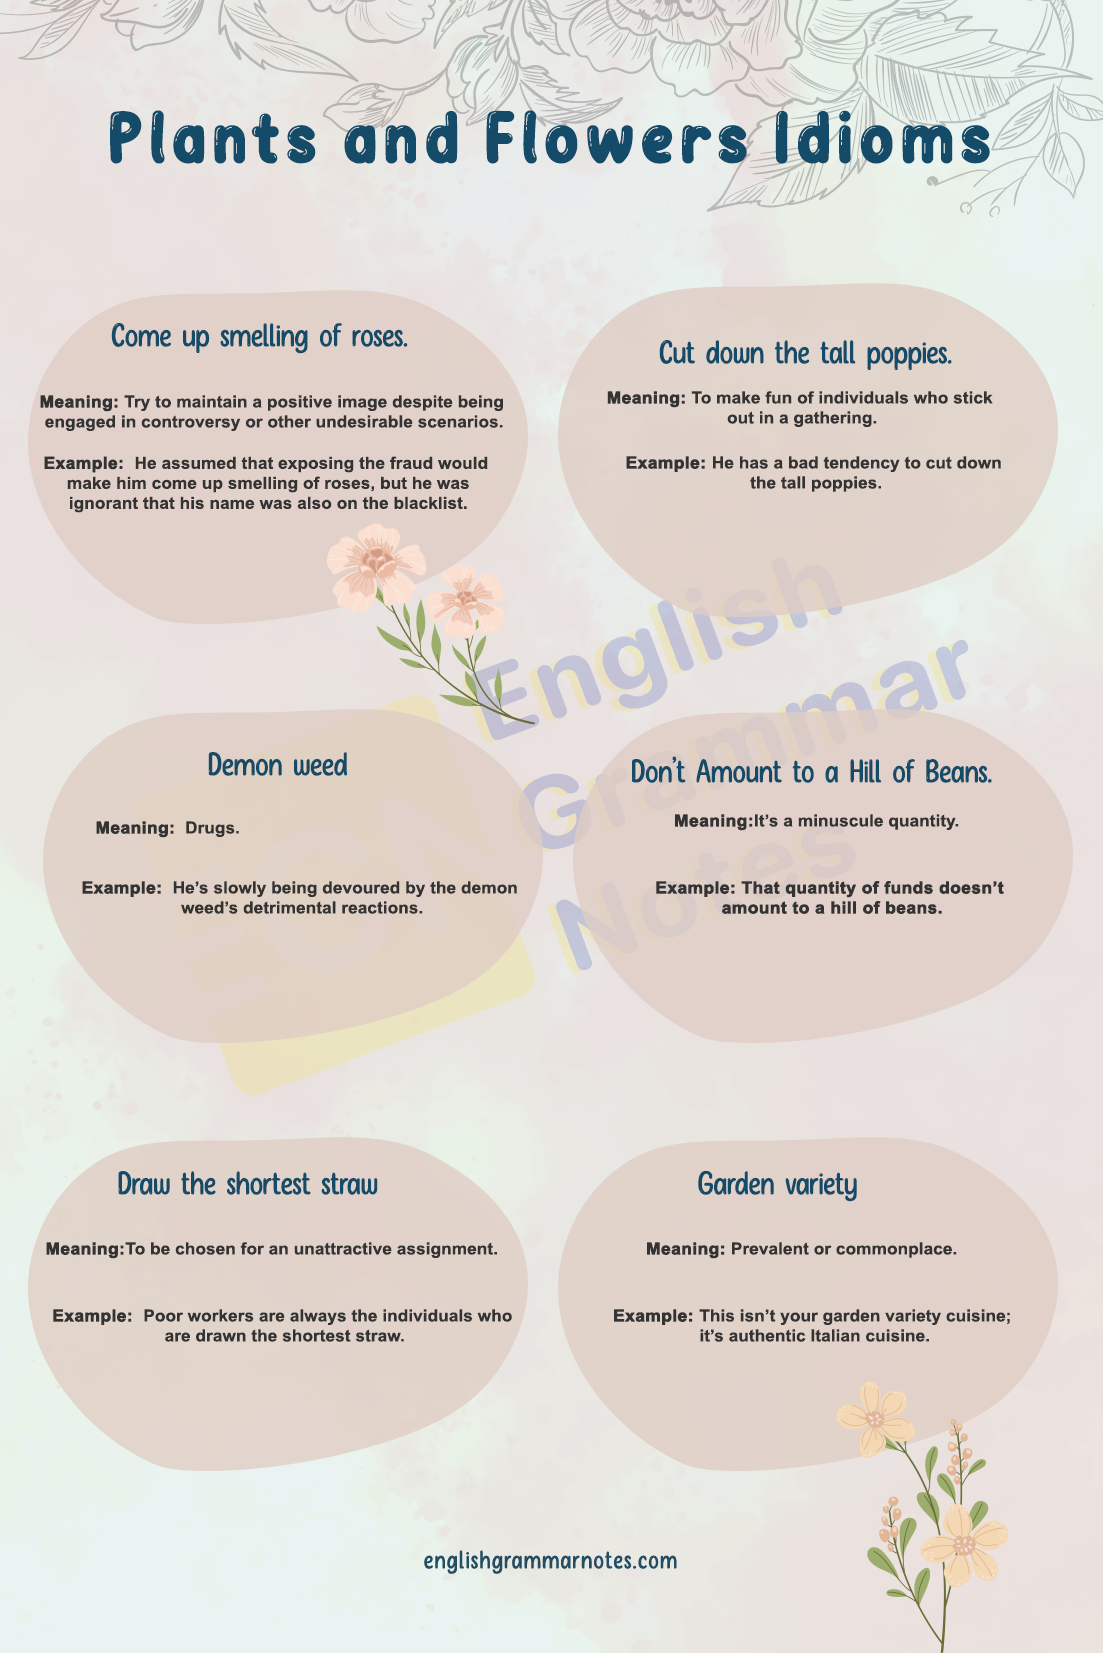 Plants and Flowers Idioms 2